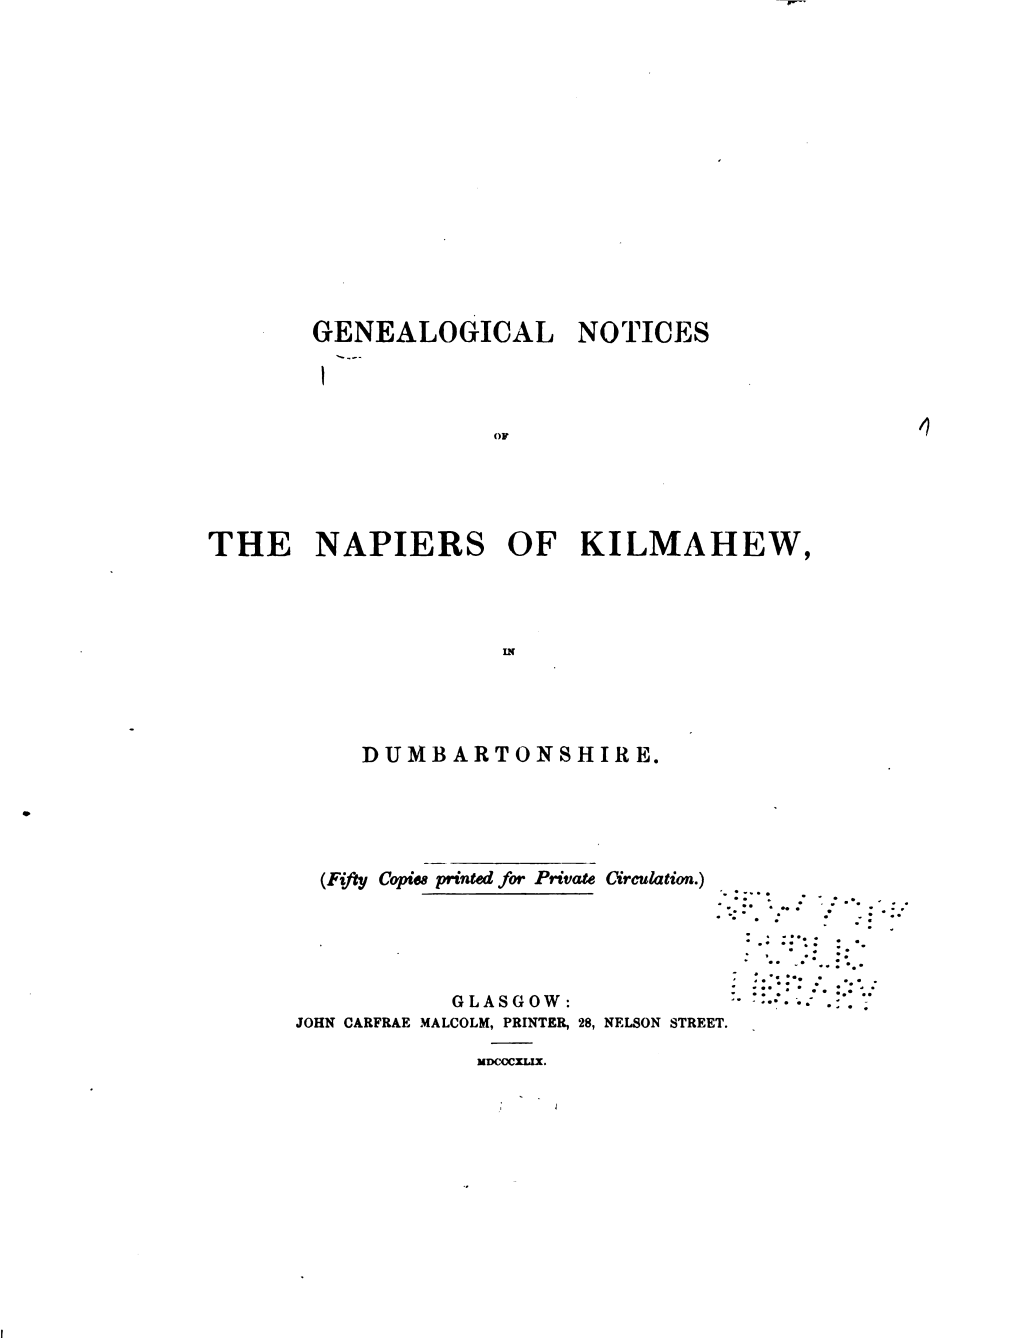 Genealogical Notices of the Napiers of Kilmahew in Dumbartonshire